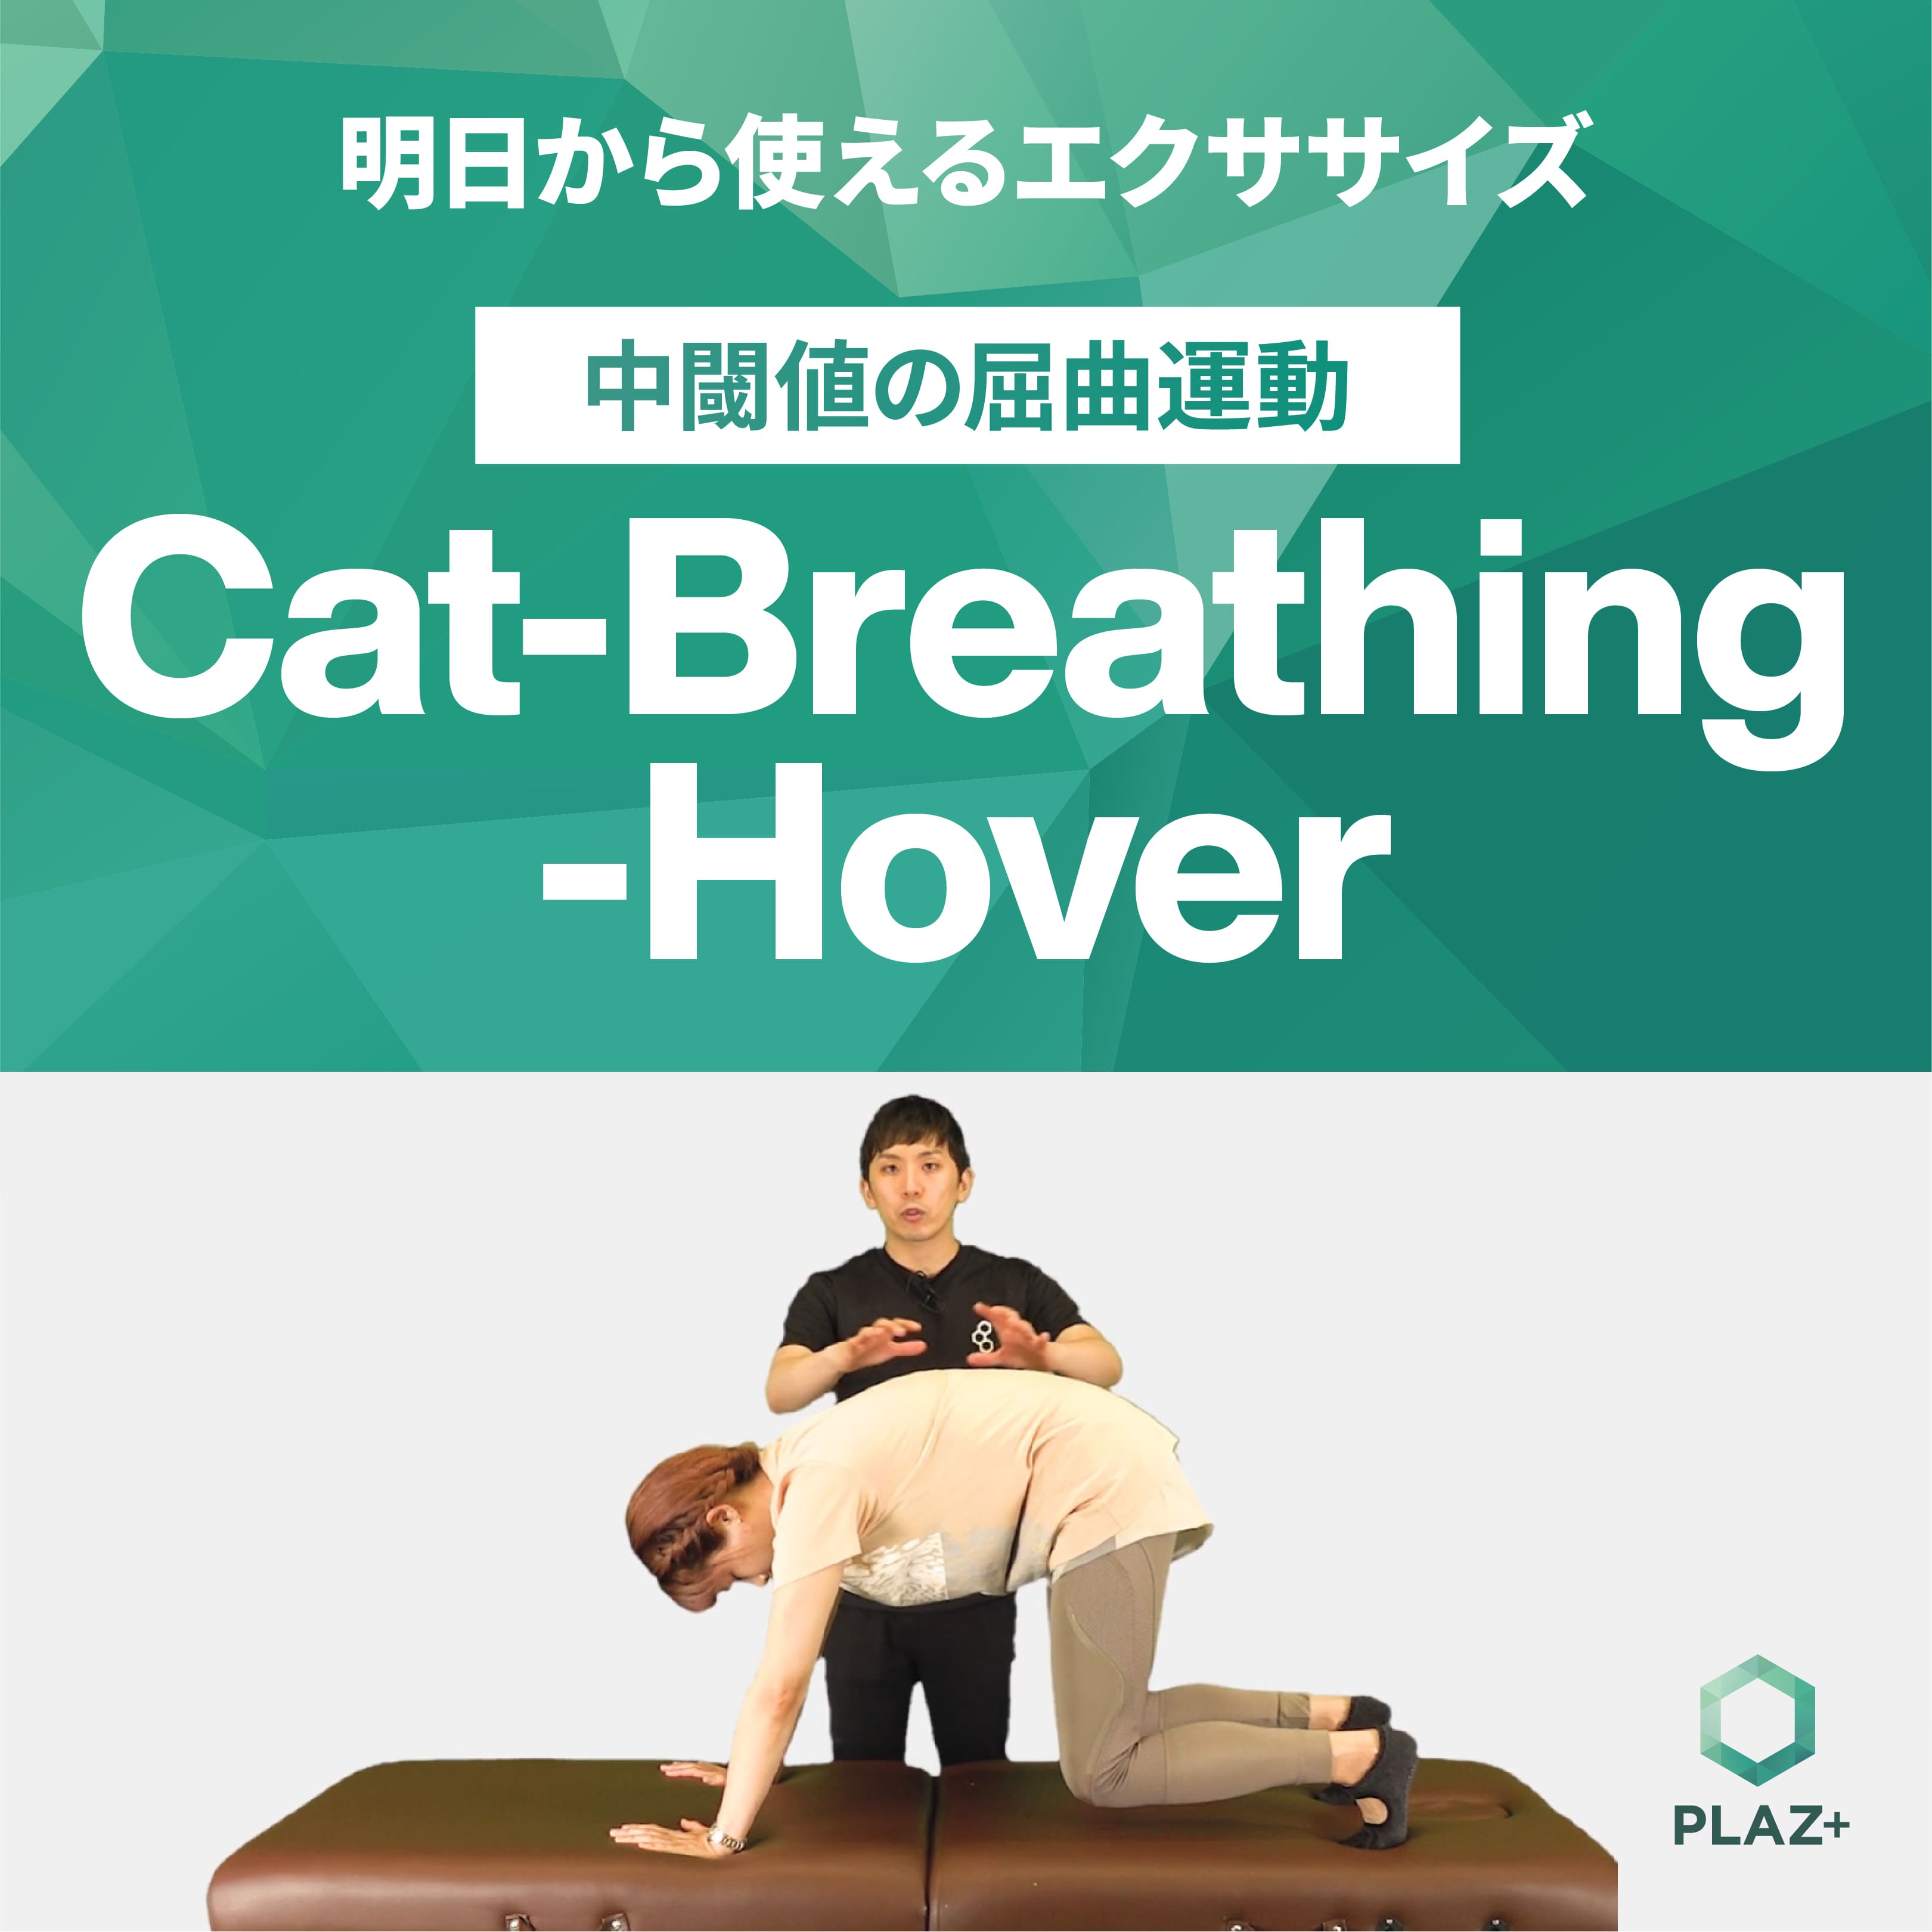 Cat-Breathing-Hover